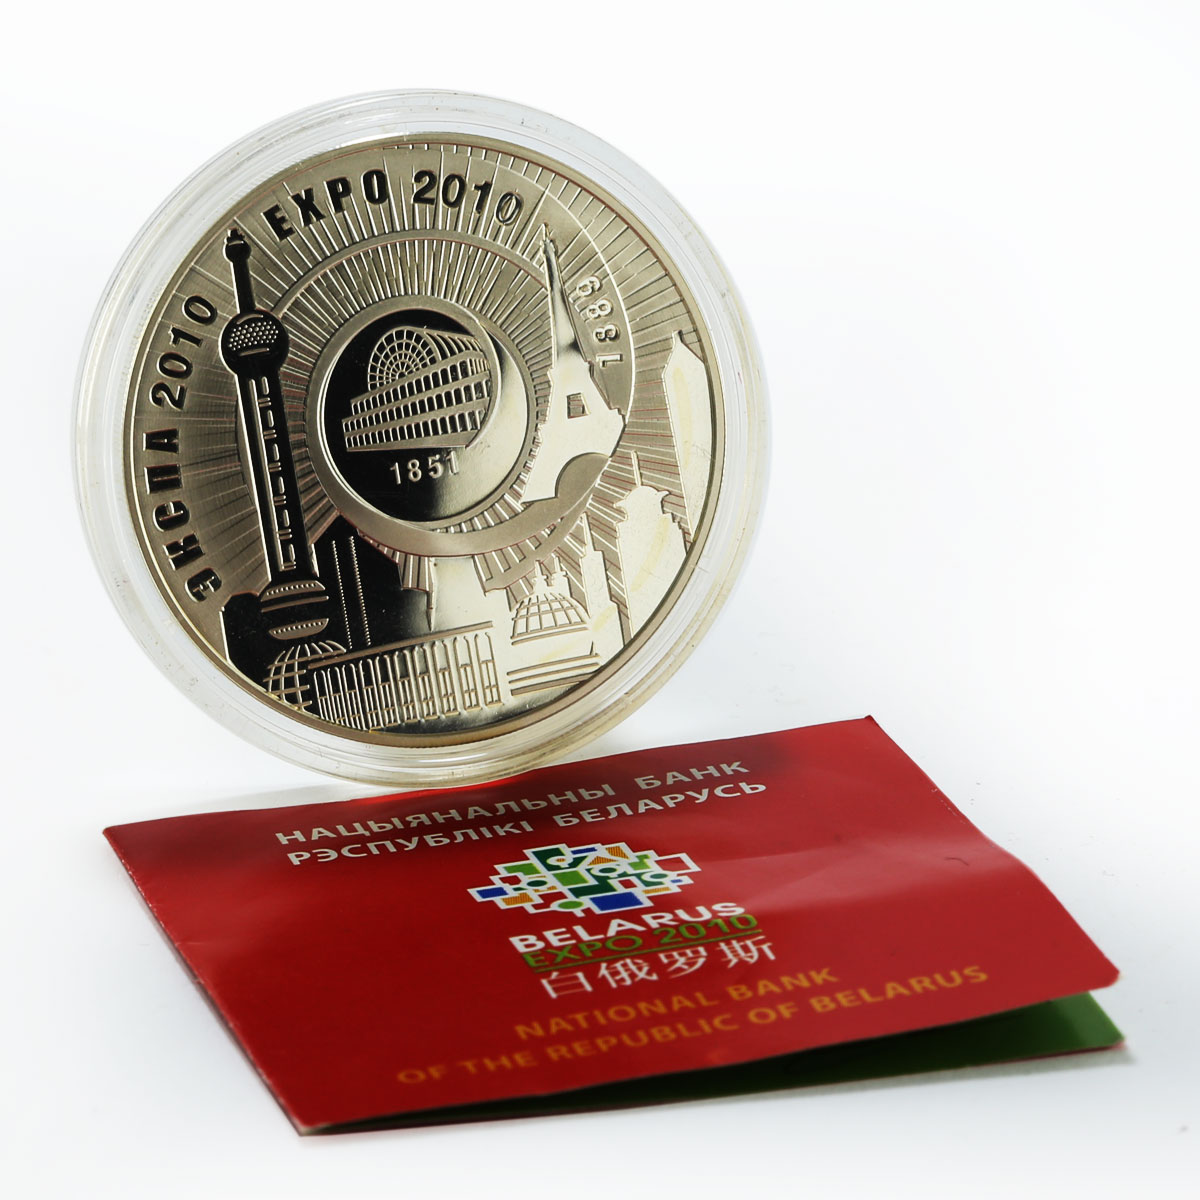 Belarus 20 rubels Expo Exhibition proof silver coin 2010